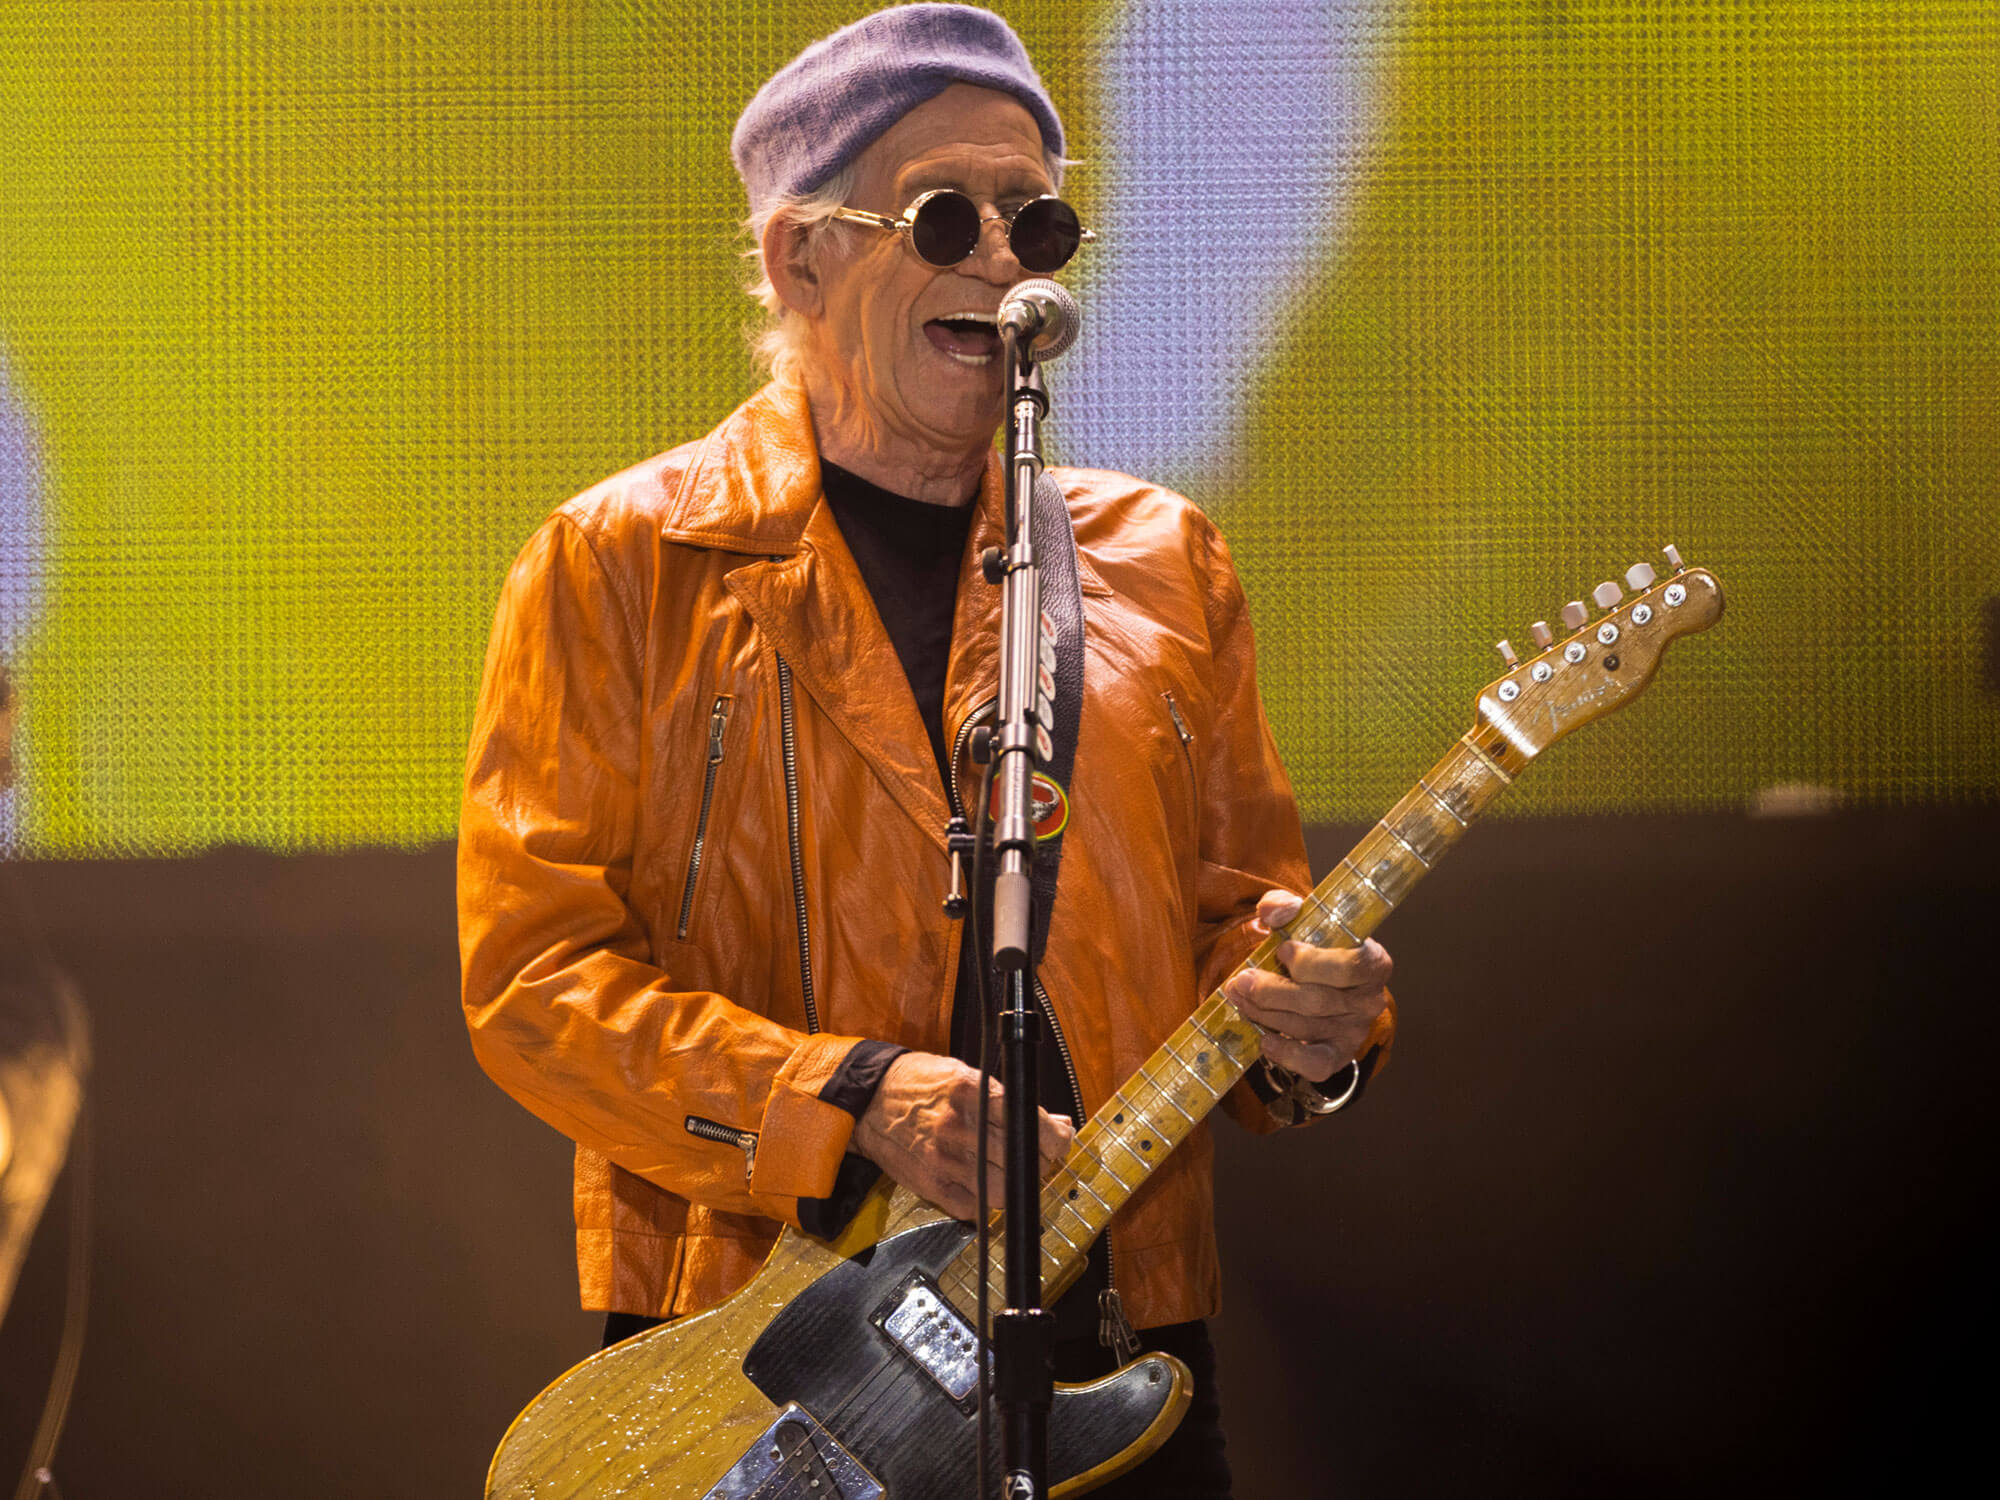 Keith Richards performing live